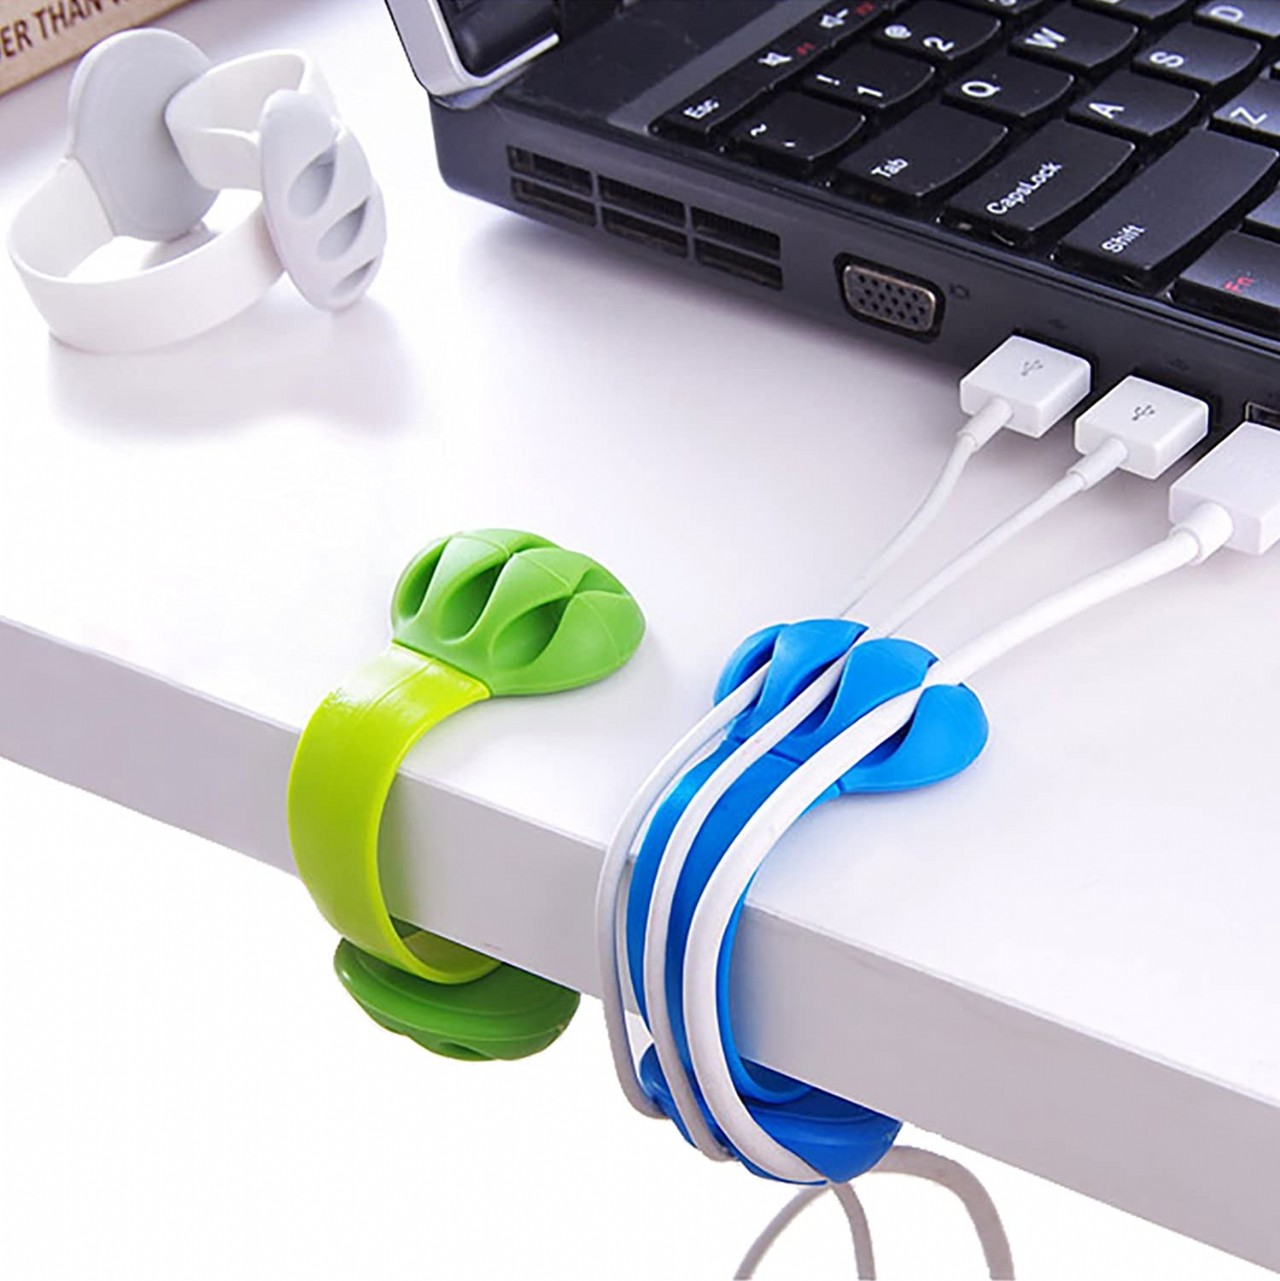 Cable Holder - Cord Organizer - Cable Management Clips - Wire Holder System -3 Packs Multipurpose